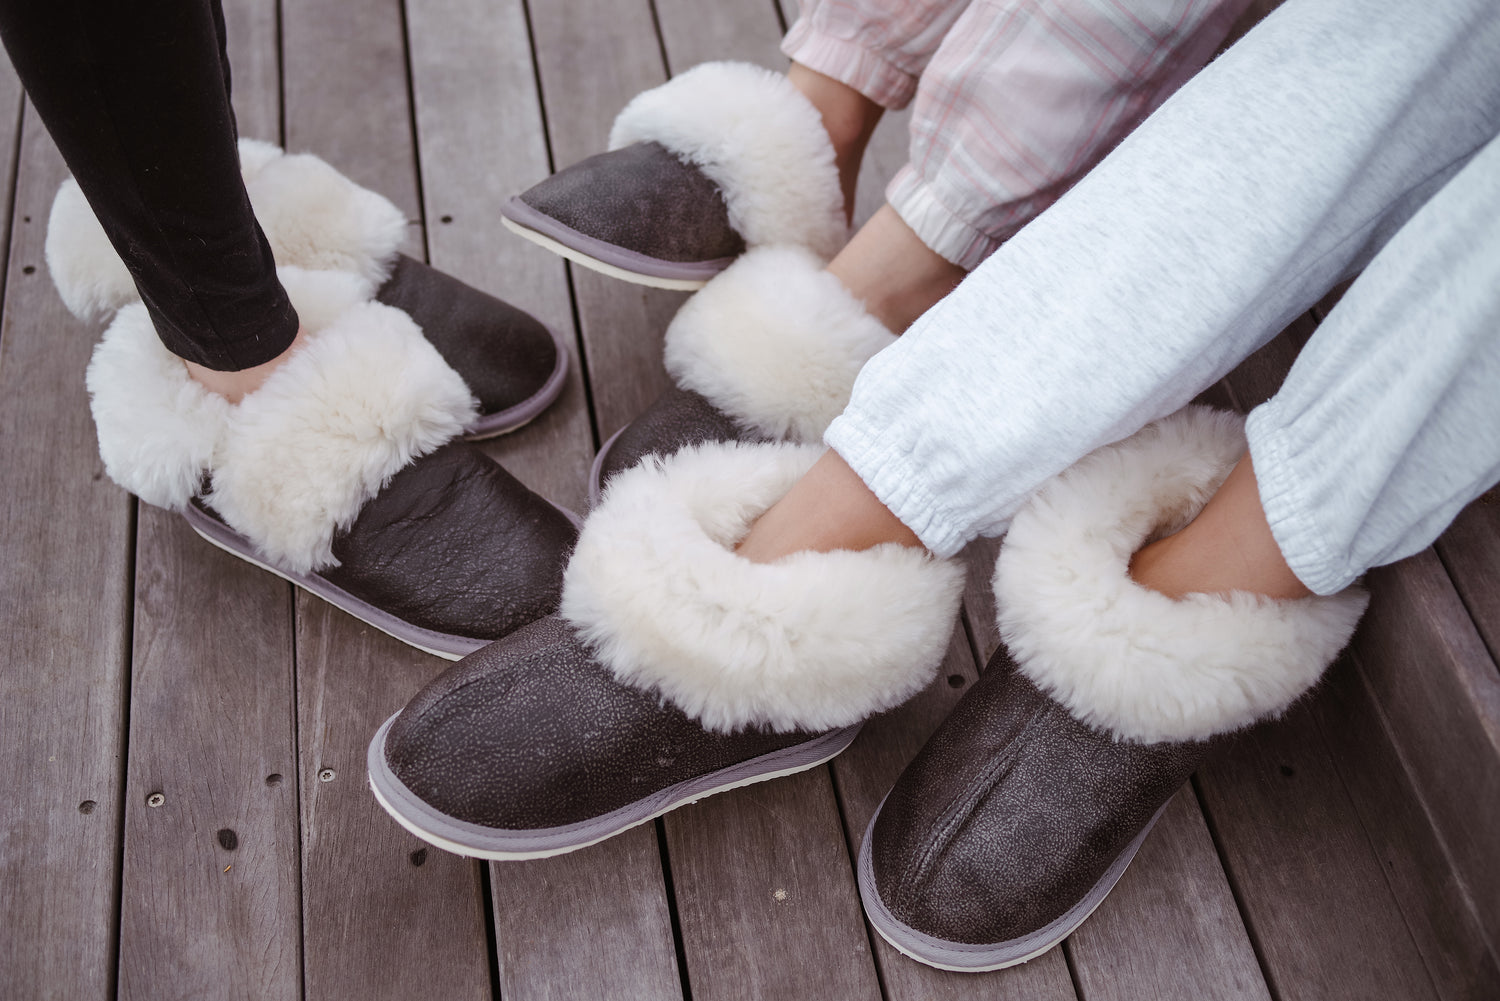 Charcoal Grey Slipper variety - Cosy, Classic and Mule slippers made from merino sheepskin and genuine leather